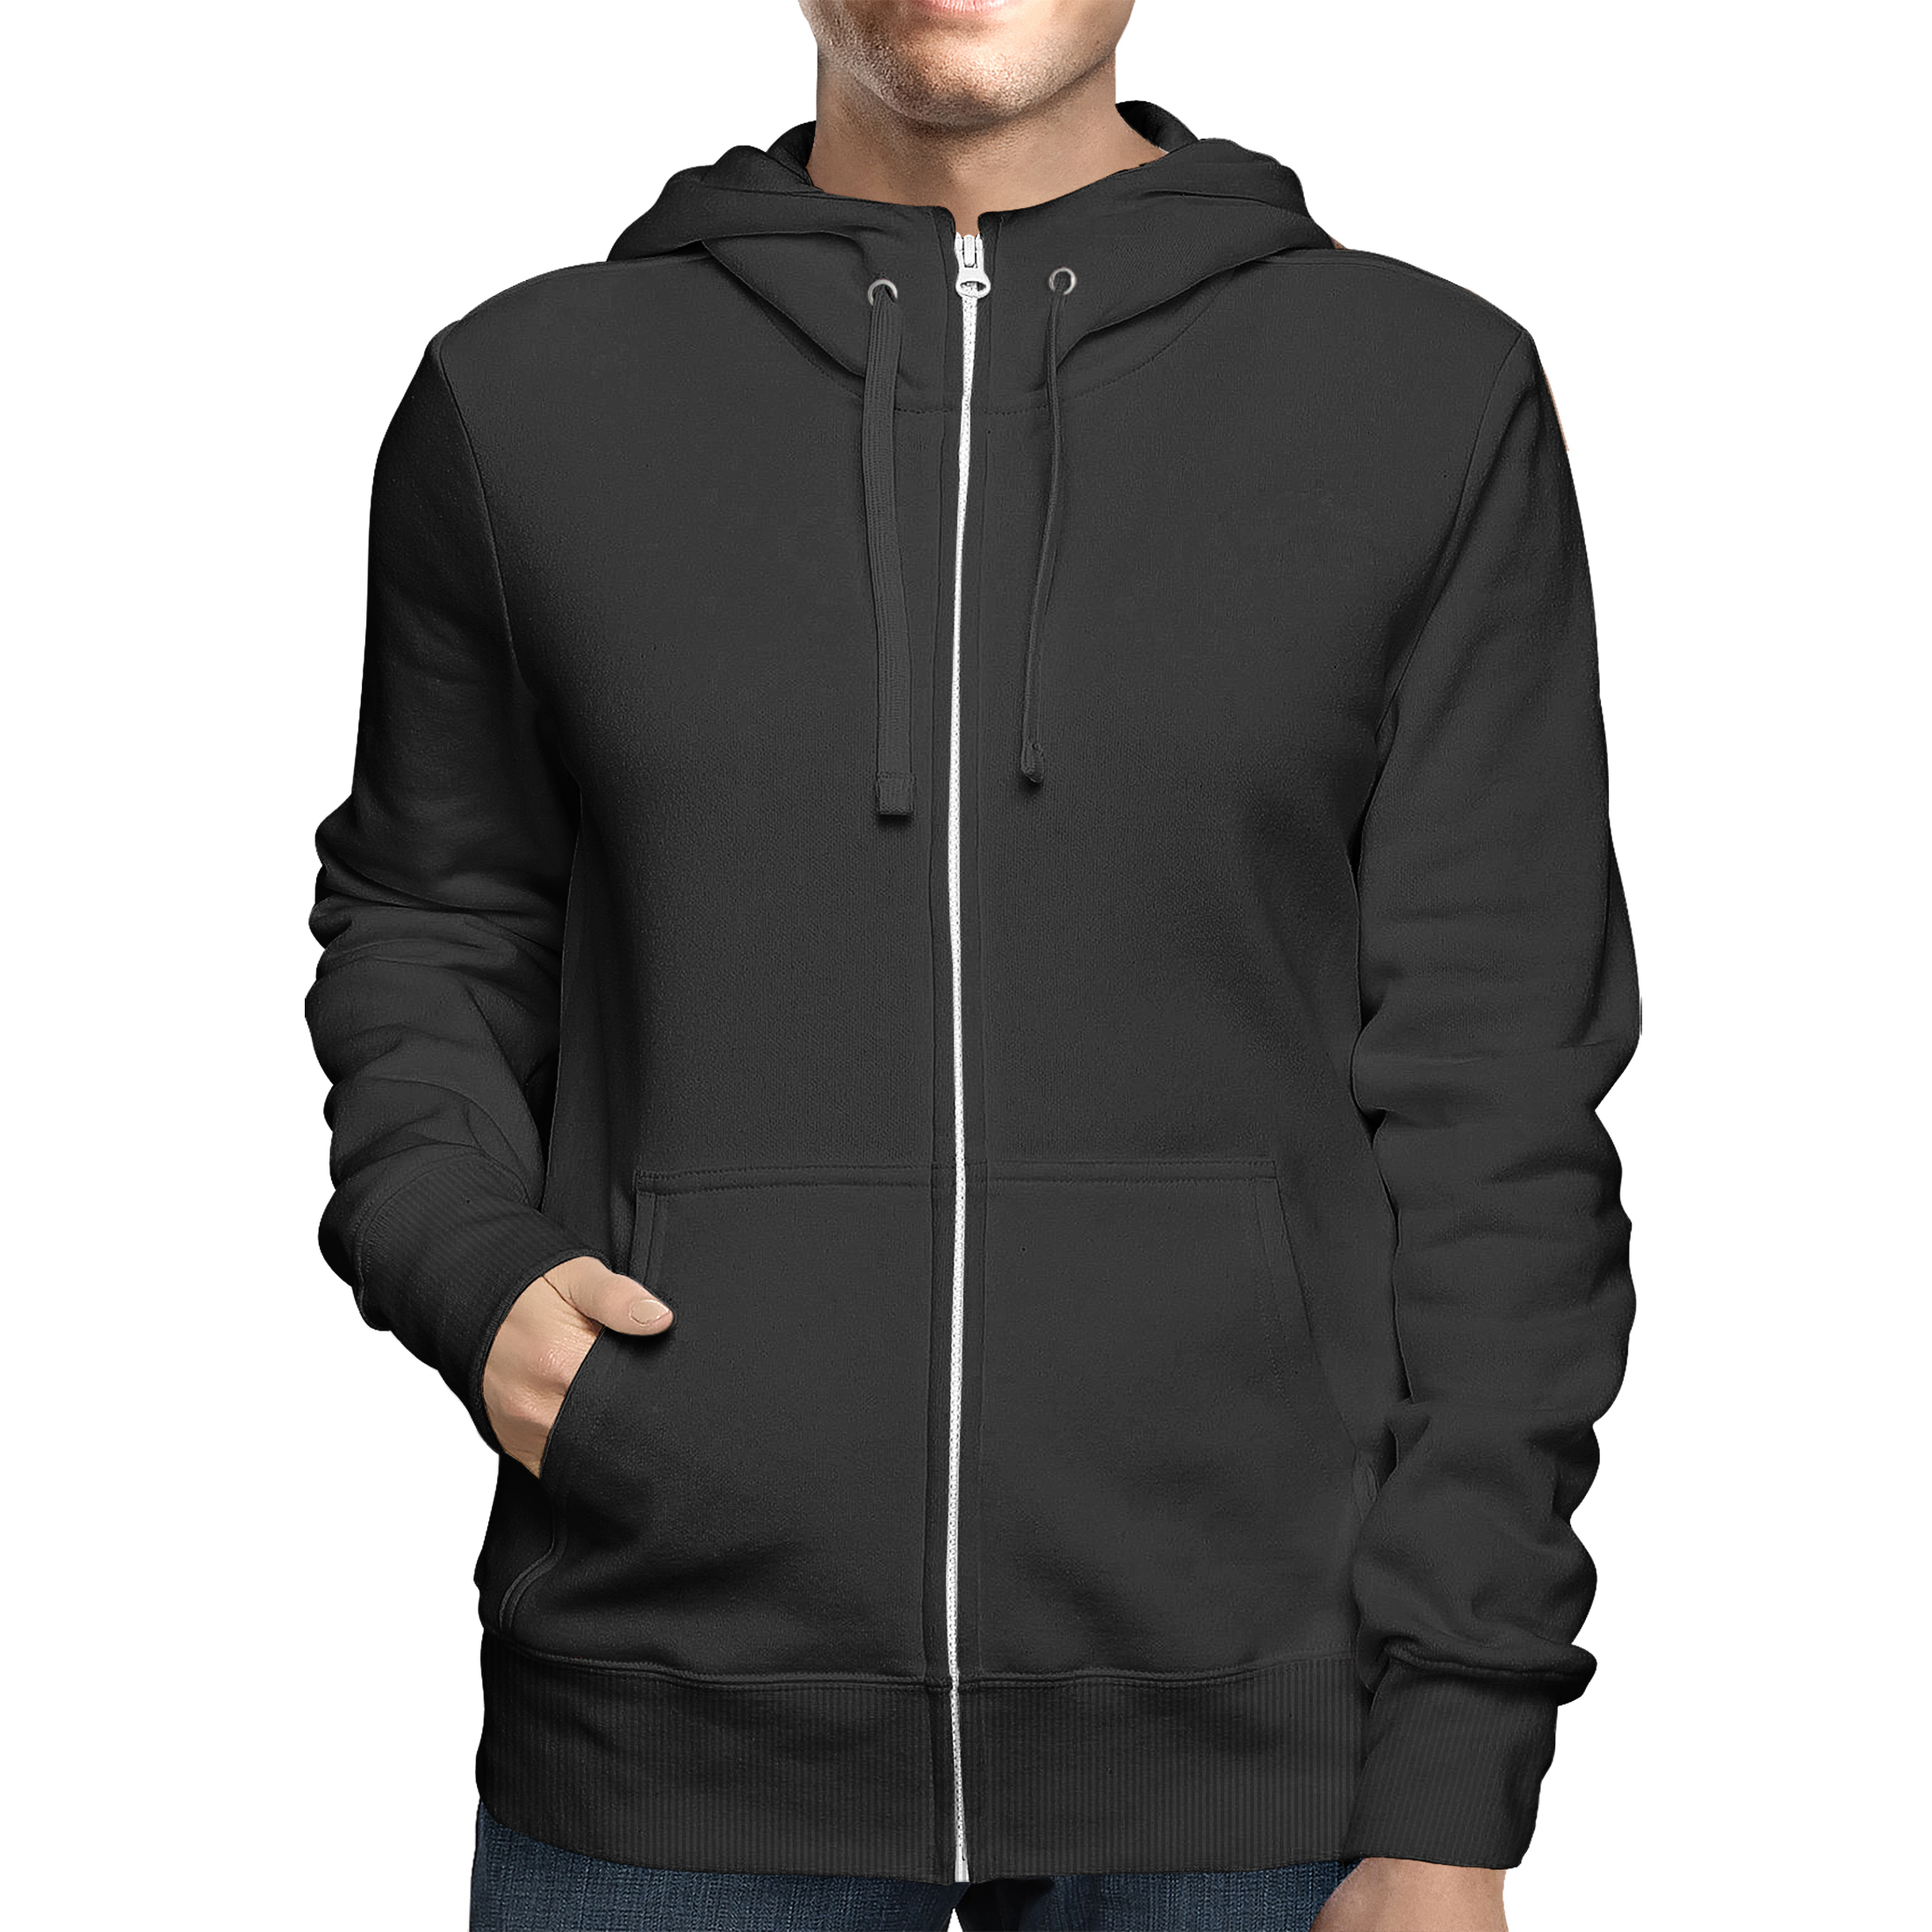 2-Pack: Men's Full Zip Up Fleece-Lined Hoodie Sweatshirt (Big & Tall Size Available) - Black, Small